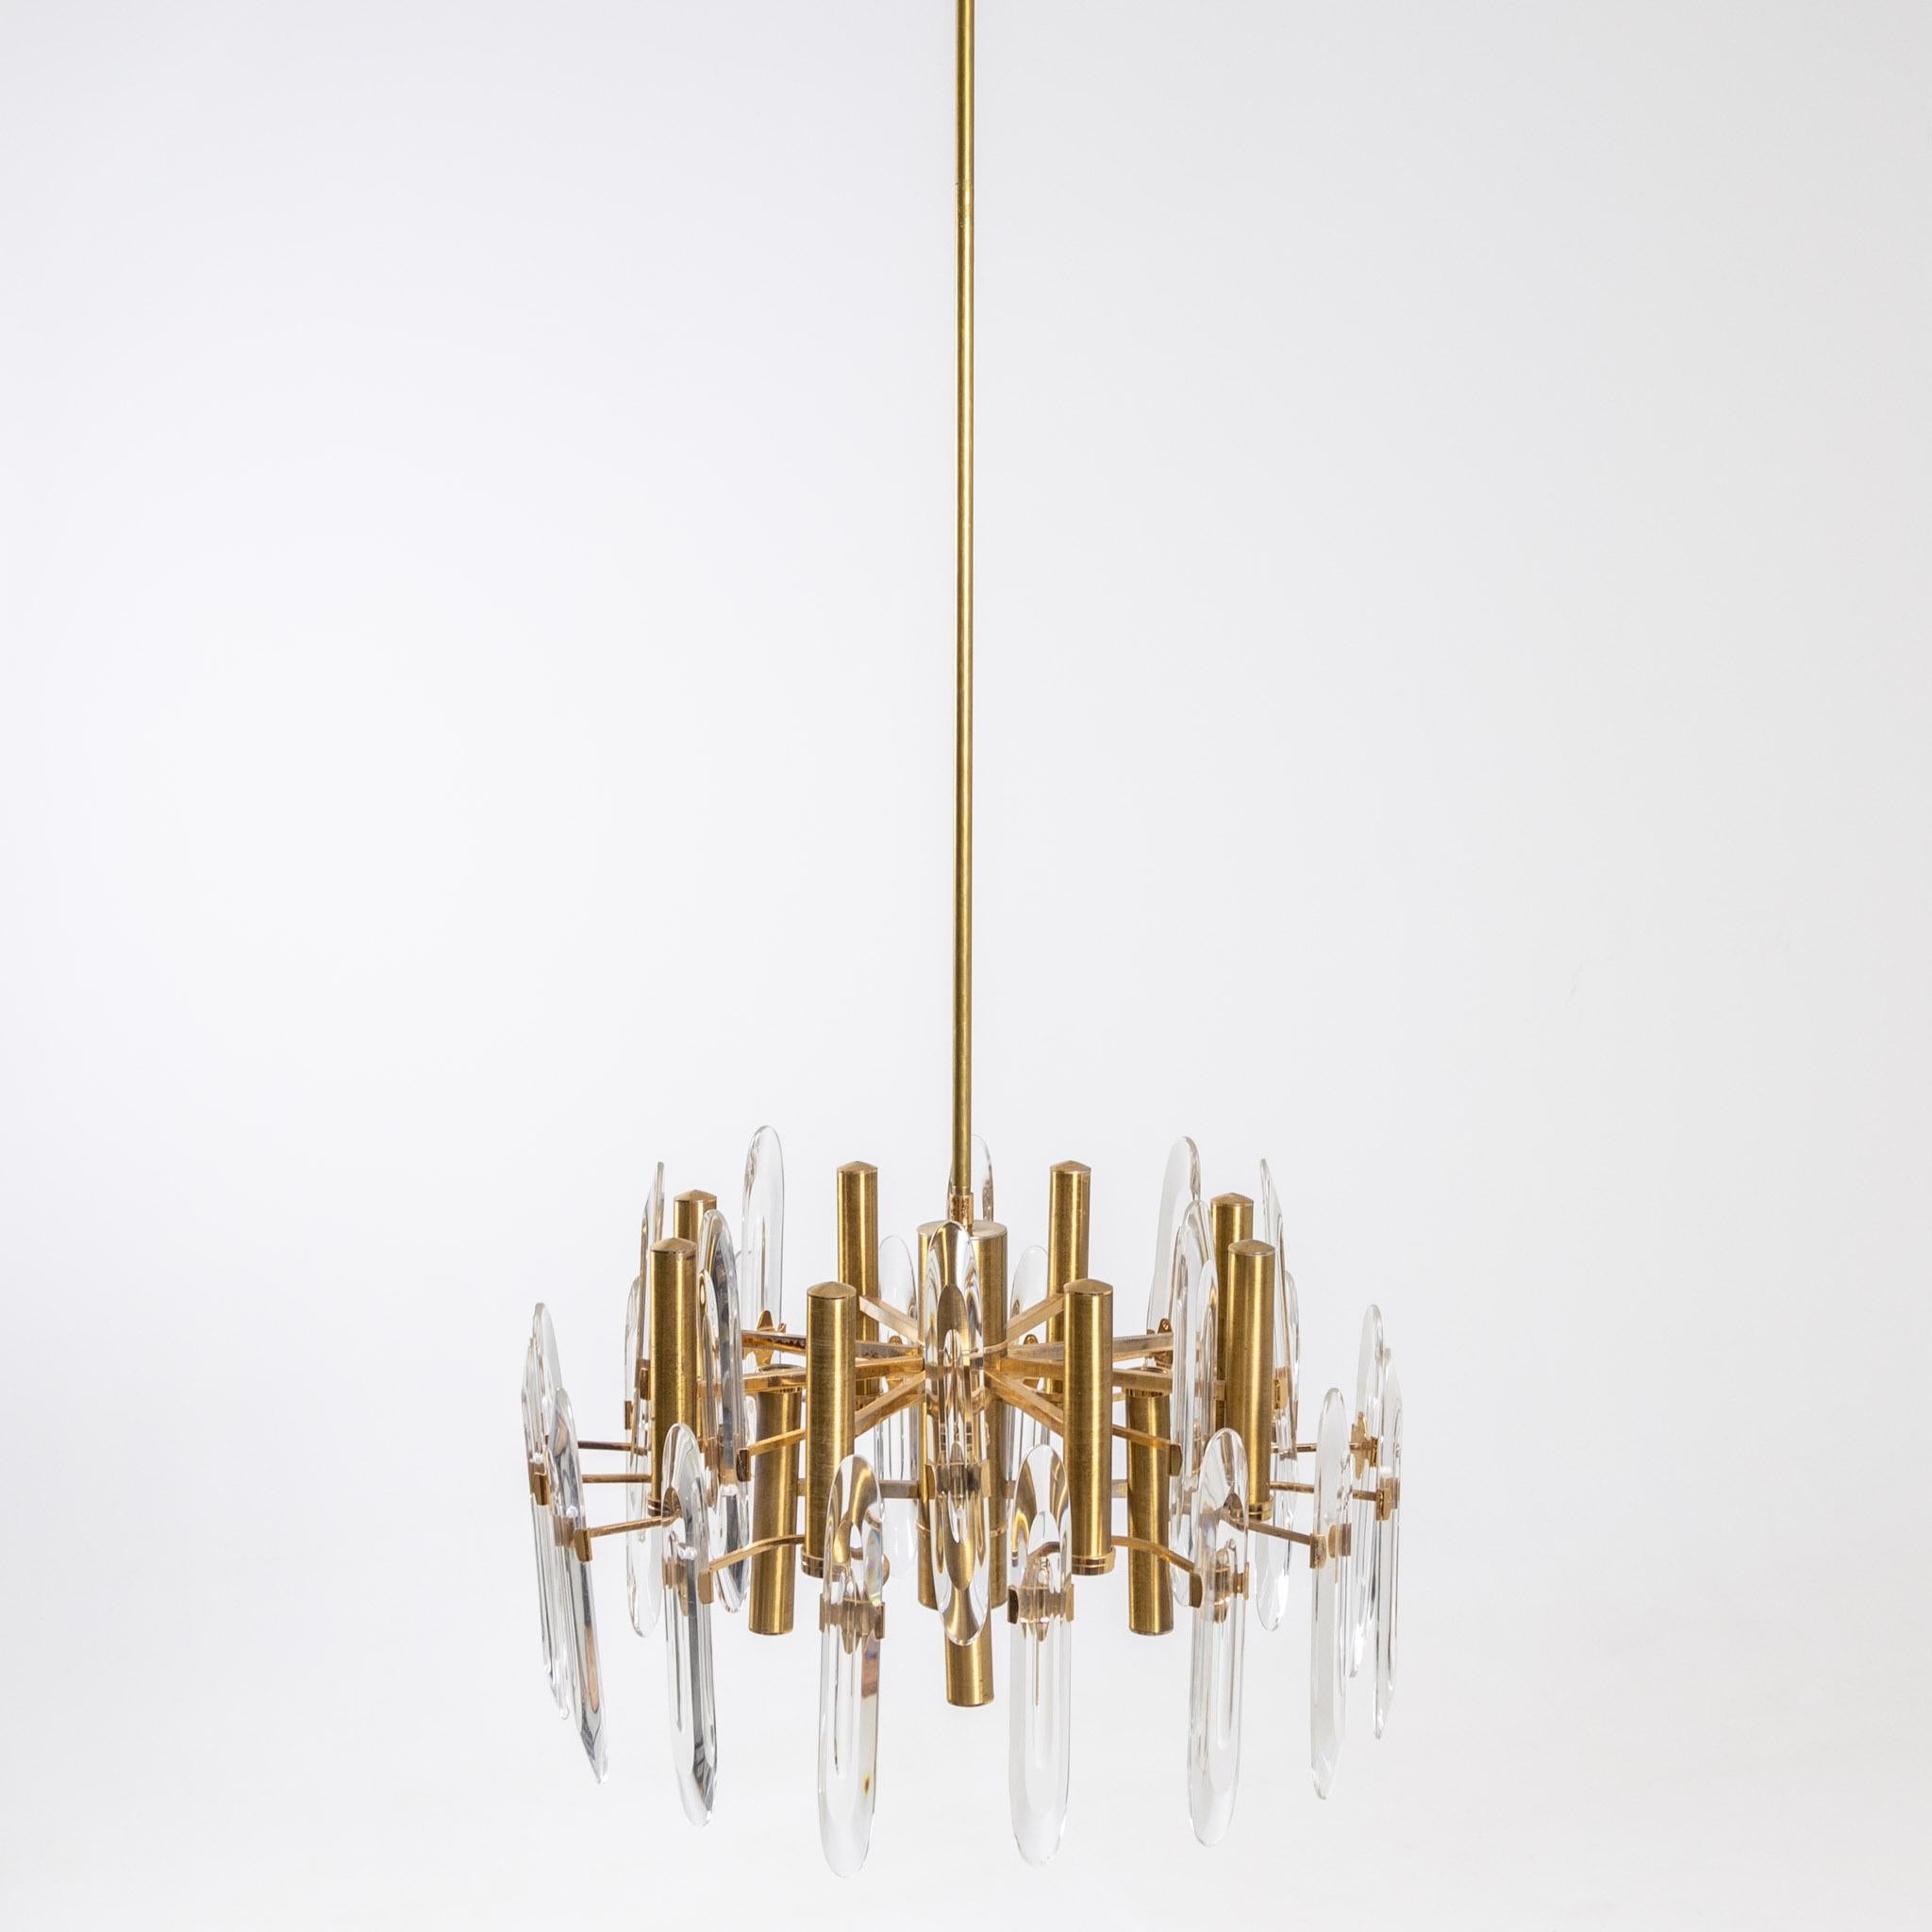 Large brass chandelier with eight sockets and oval glass elements by Gaetano Sciolari.